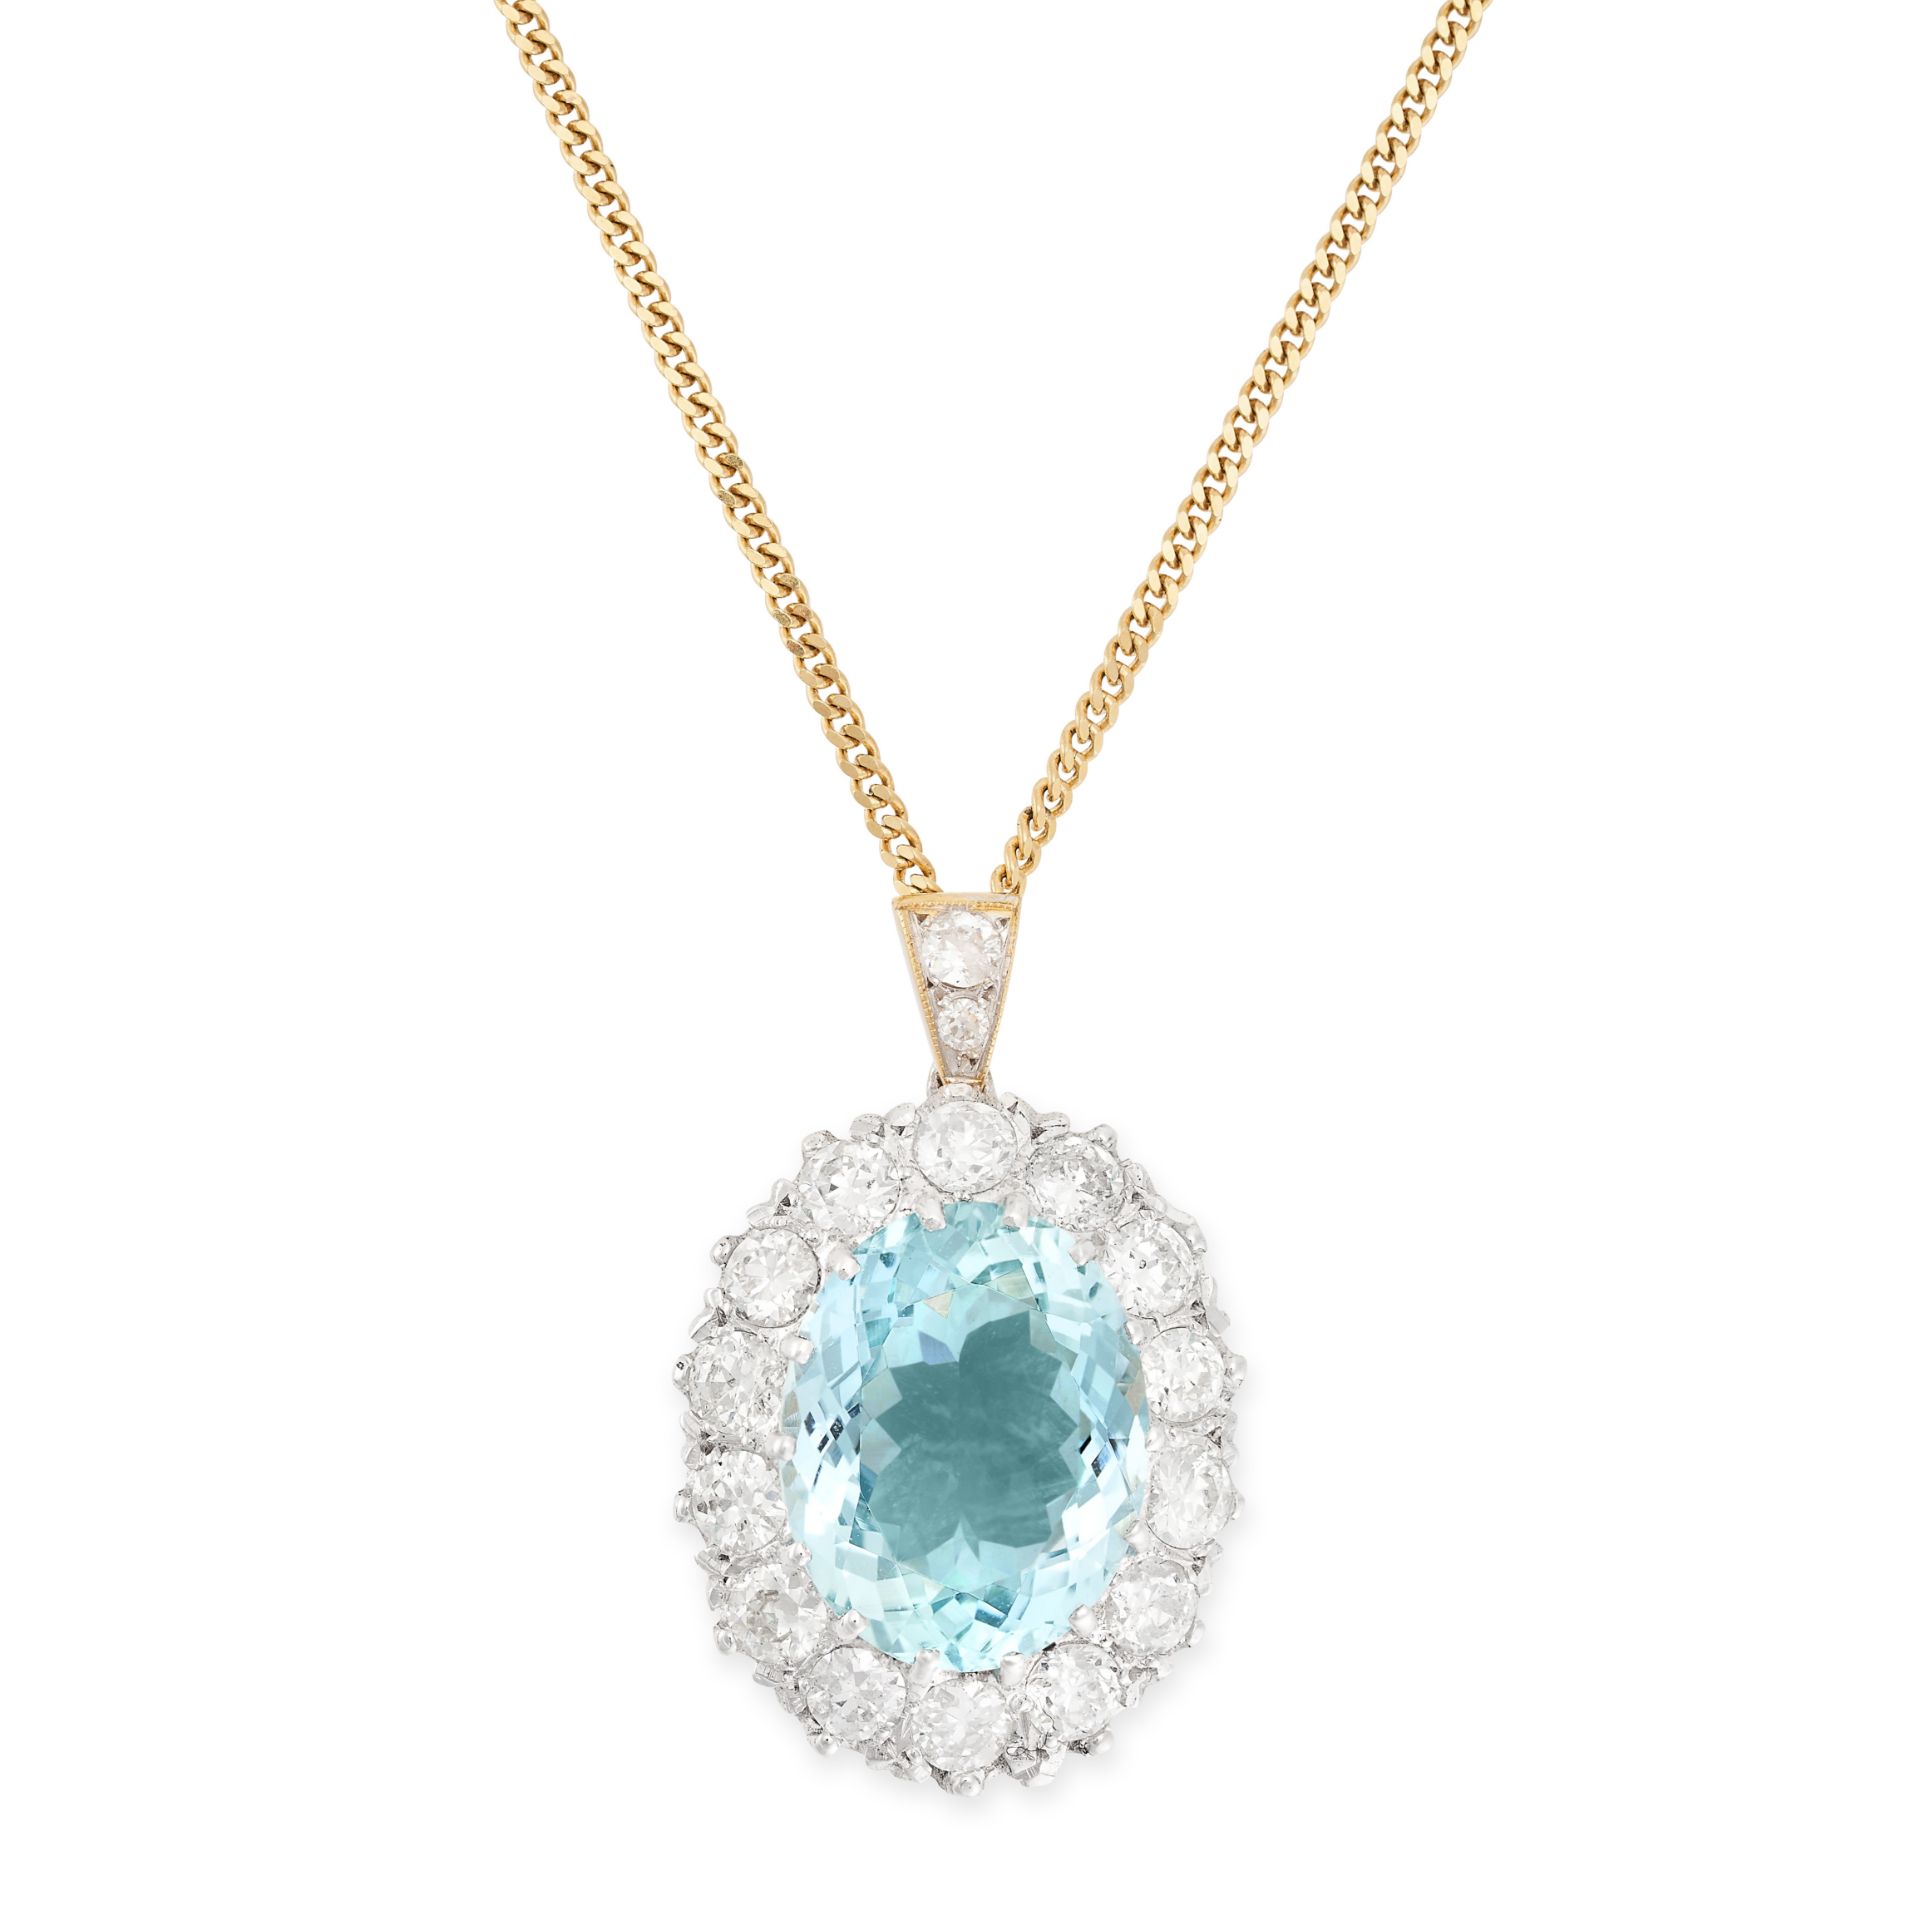 AN AQUAMARINE AND DIAMOND PENDANT NECKLACE set with an oval cut aquamarine of 6.61 carats in a